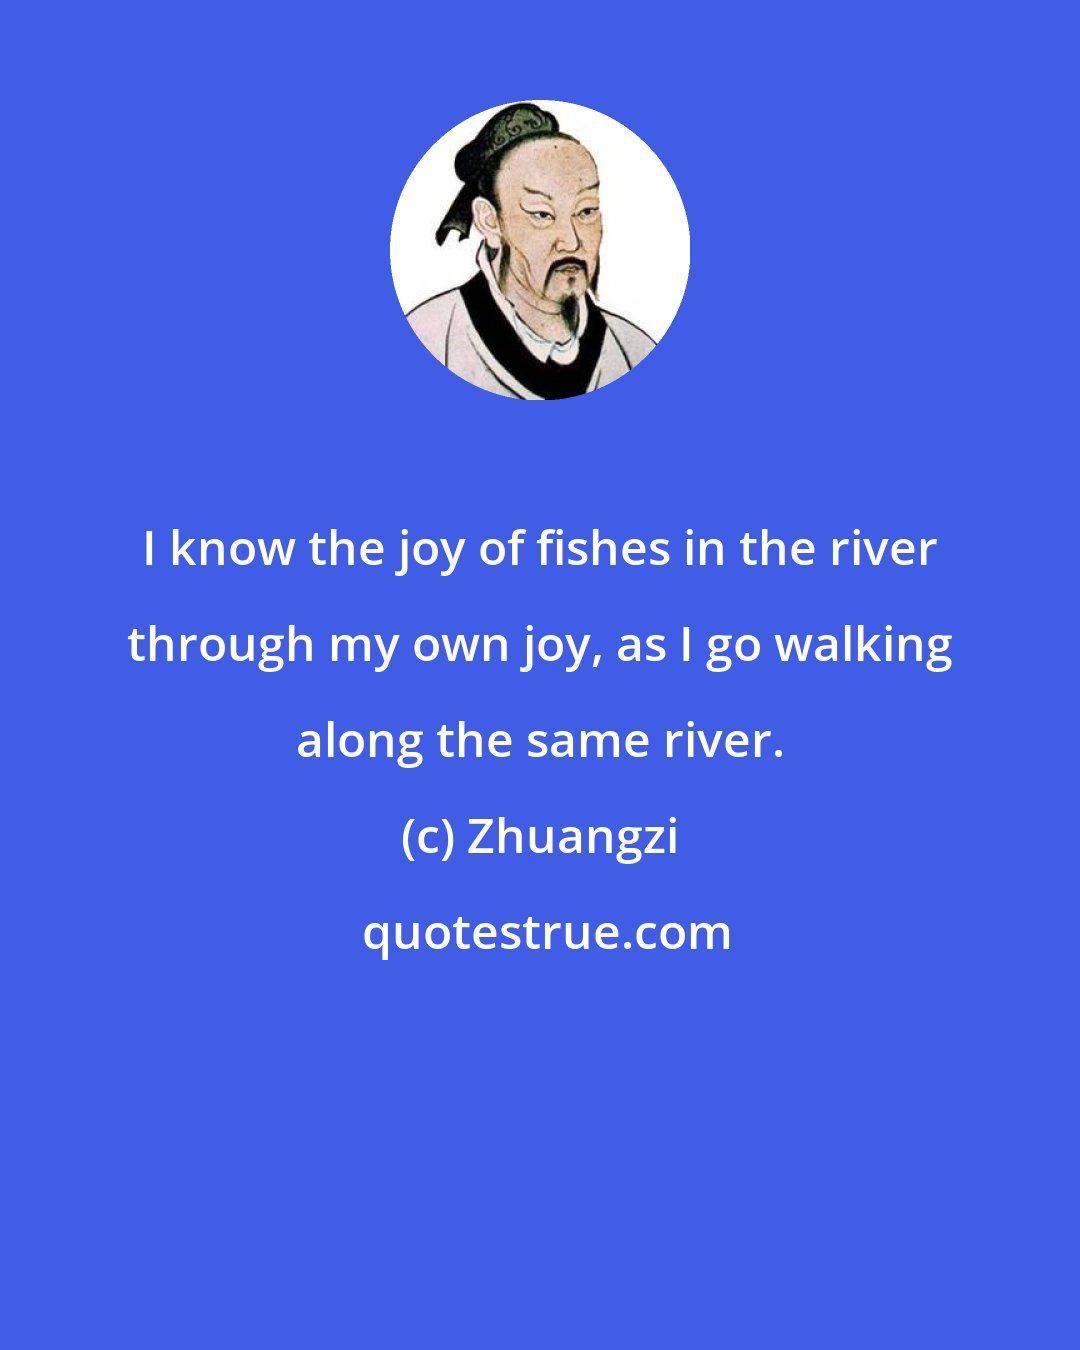 Zhuangzi: I know the joy of fishes in the river through my own joy, as I go walking along the same river.